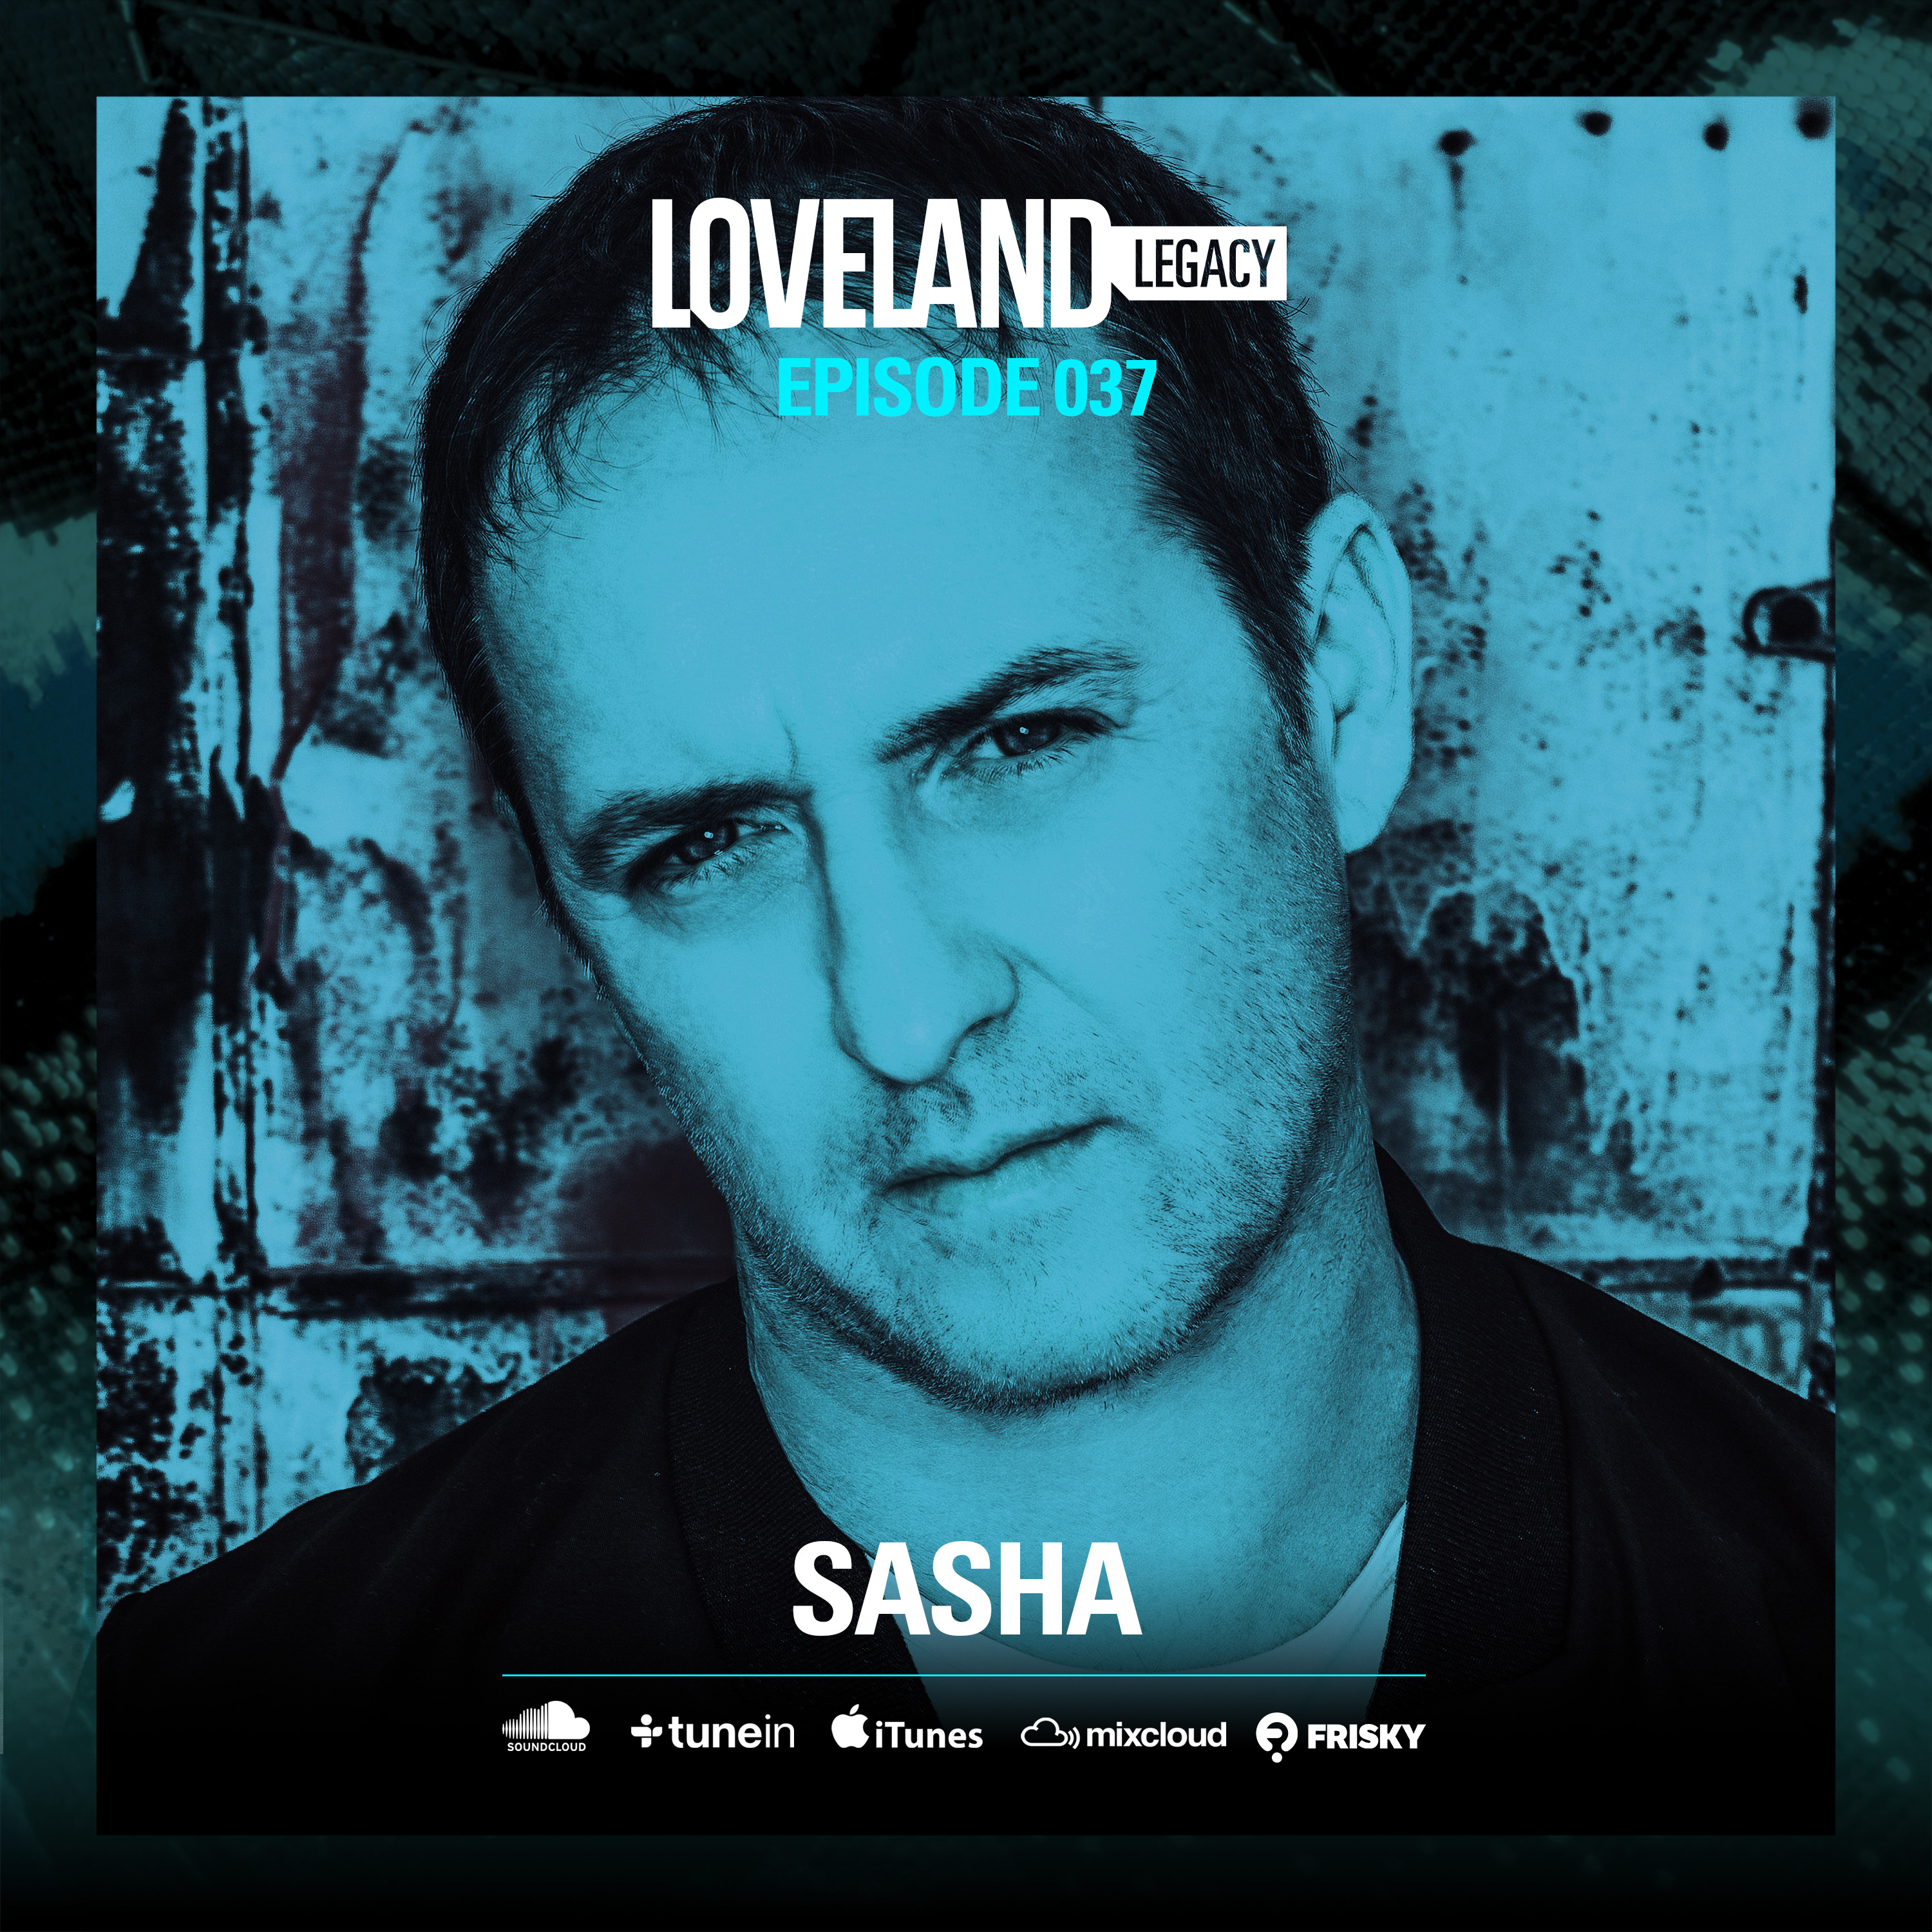 Sasha is known for his impeccable, mesmerizing sets. His performance at Loveland Festival 2015 was no exception.